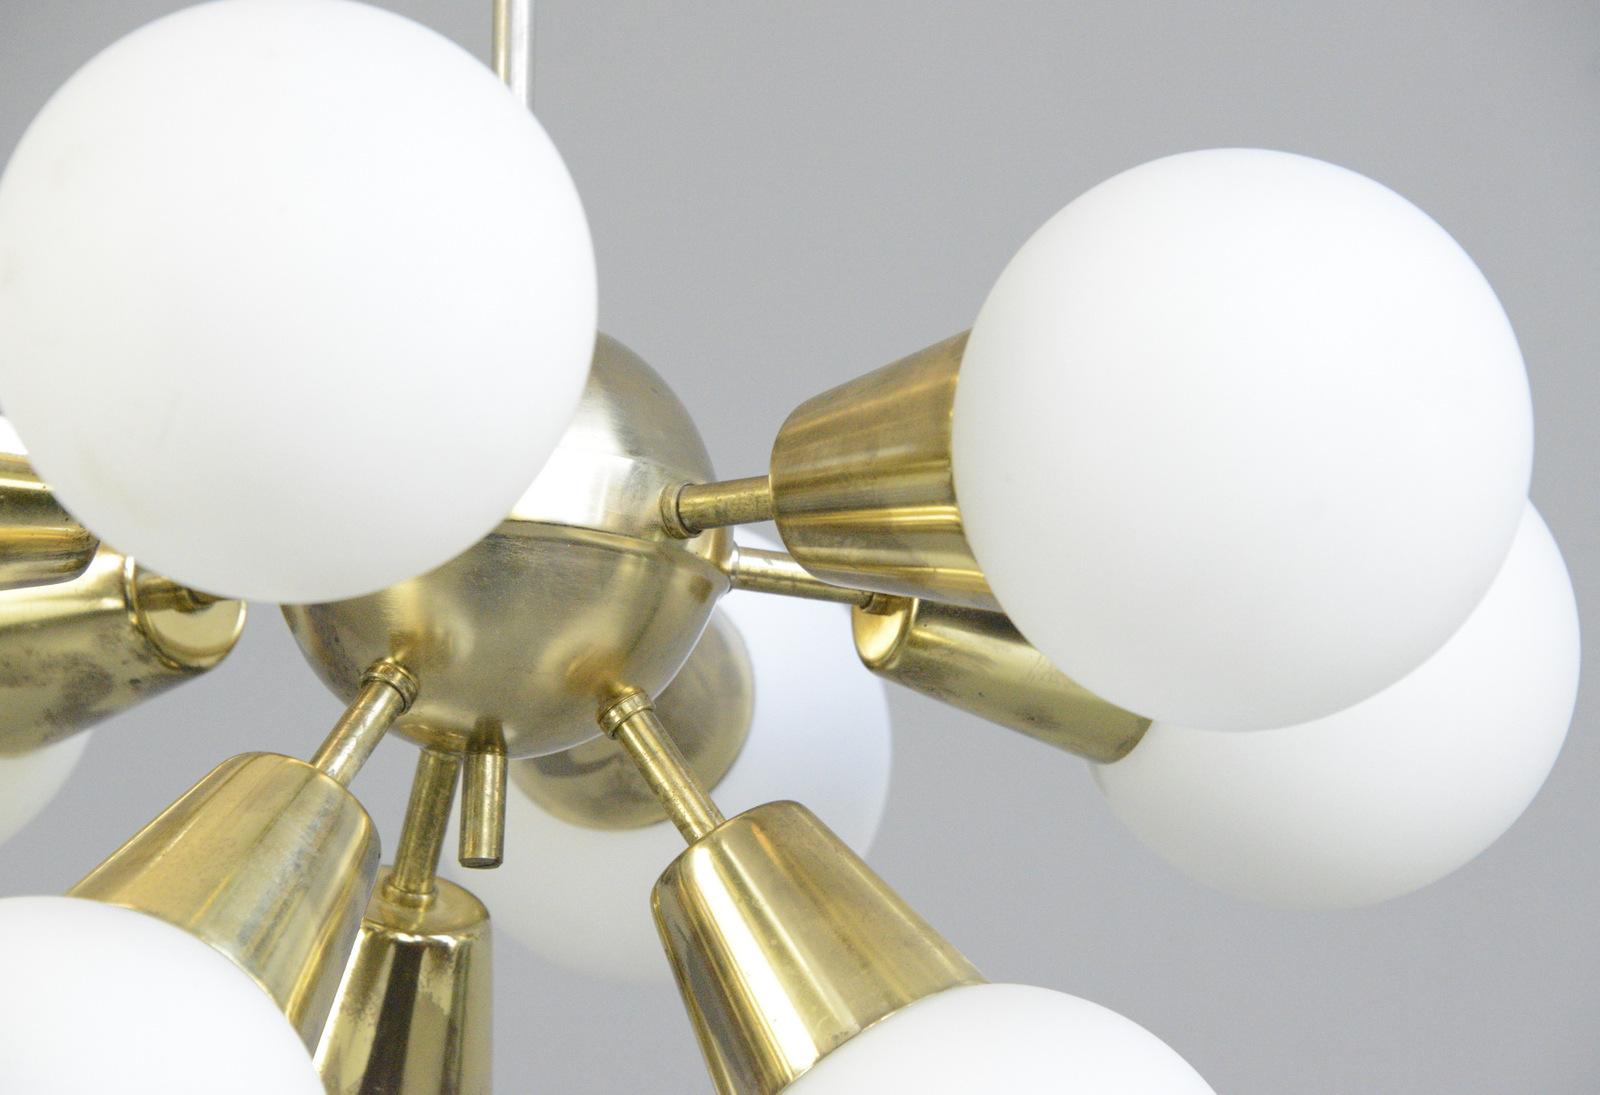 Sputnik pendant light by Kamenicky Senov

- Brass body
- 9 glass balls
- Takes E14 screw fit bulbs
- Comes with low energy LED bulbs included
- Re wired with modern electrical components
- Czech, 1960s
- Measures: 52cm wide x 52cm deep x